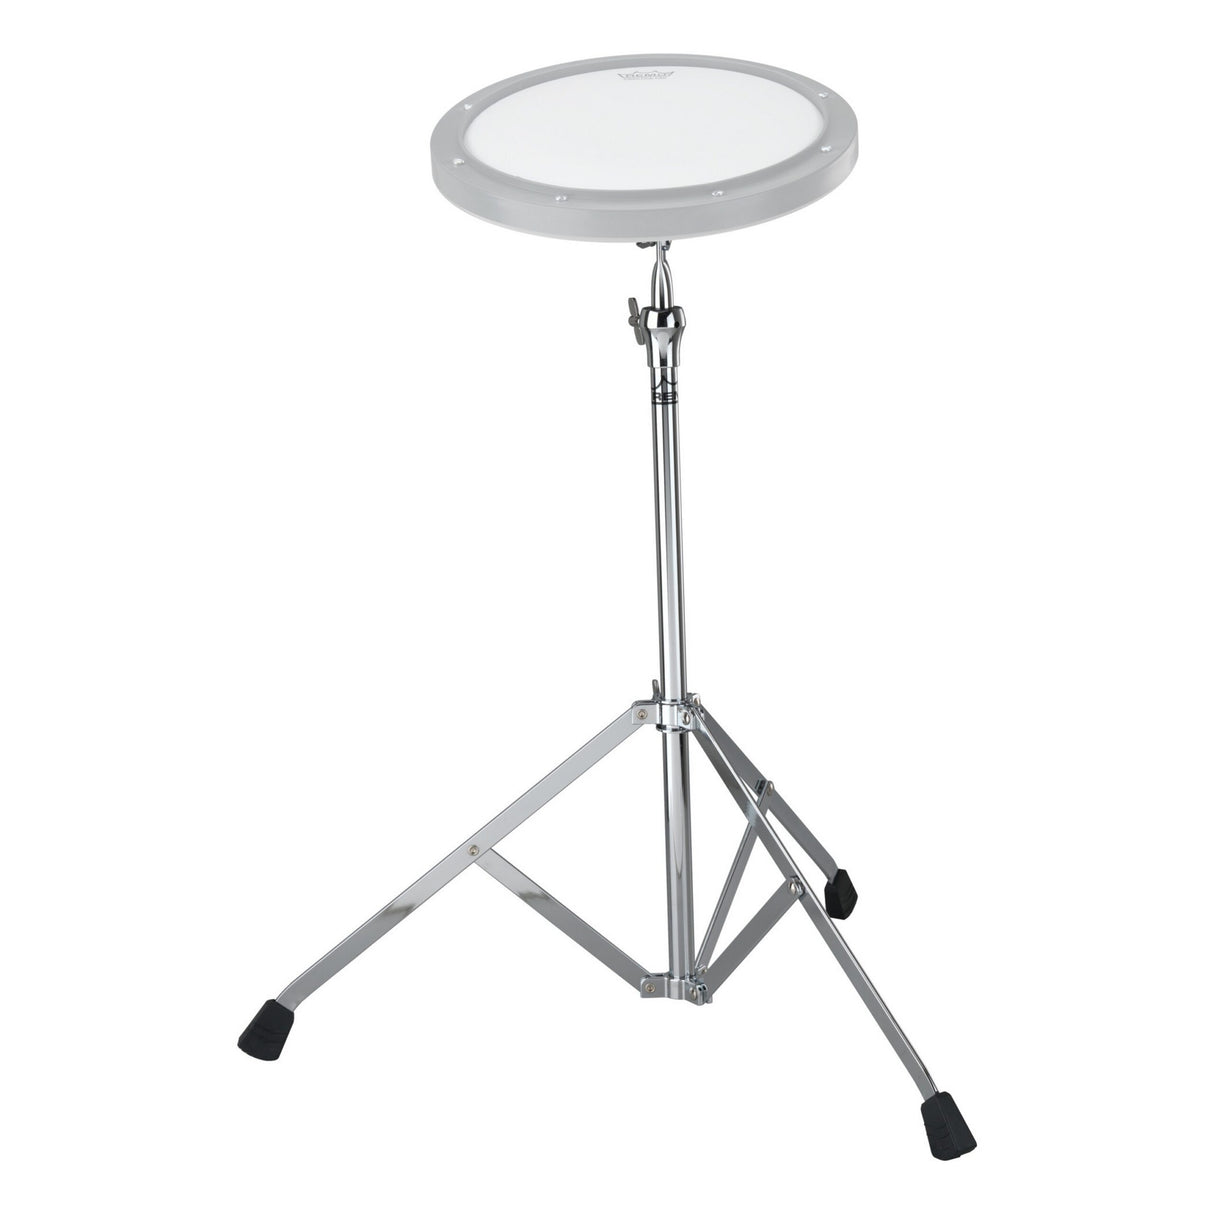 Remo ST100010-U Tall Practice Pad Stand